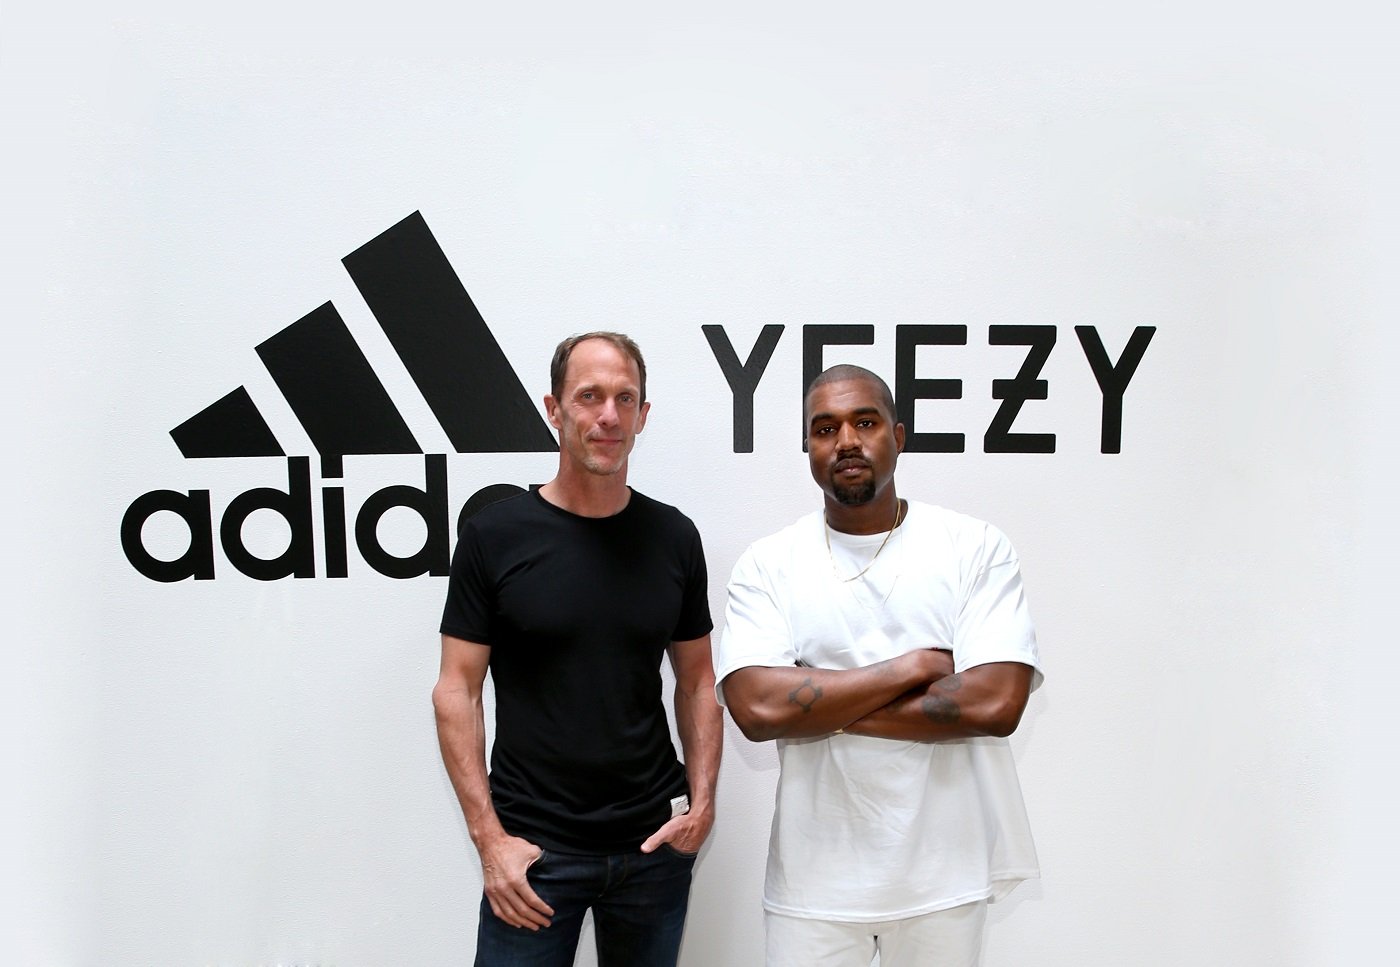 Former Adidas executive, Eric Liedtke and Kanye West at Milk Studios on June 28, 2016 in Hollywood, California